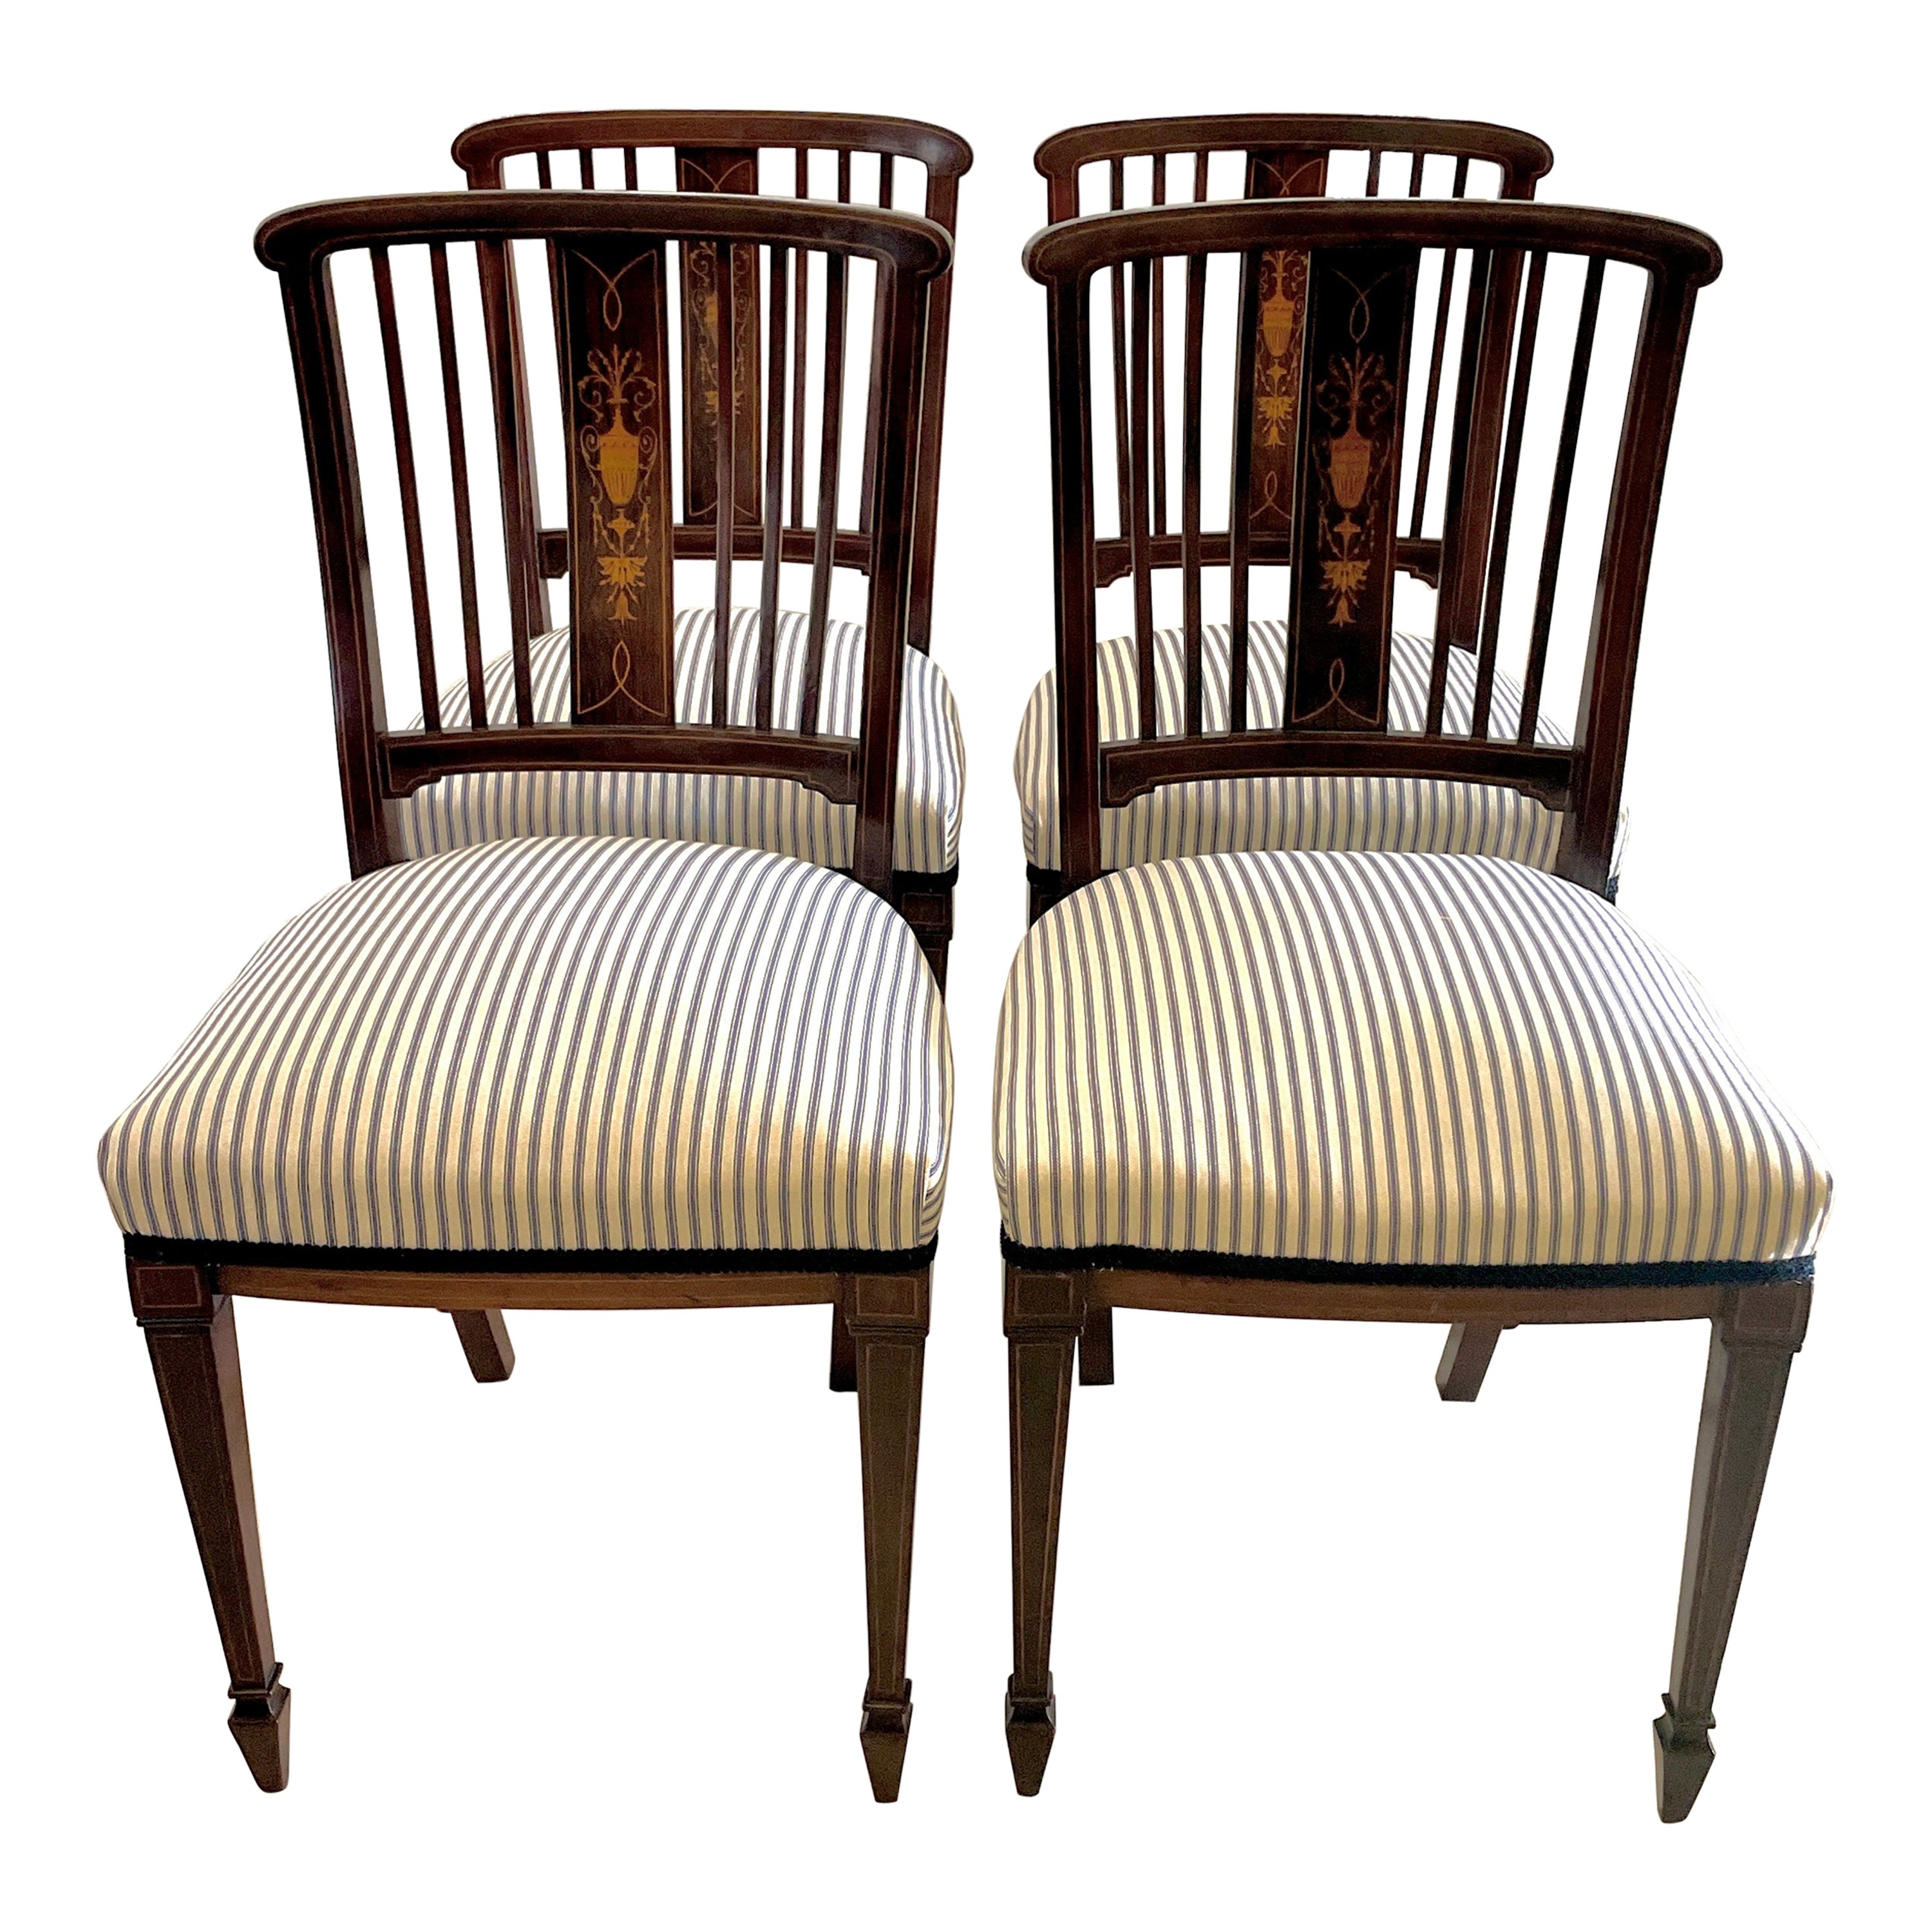 Set of 4 Antique Edwardian Quality Mahogany Inlaid Dining Chairs For Sale